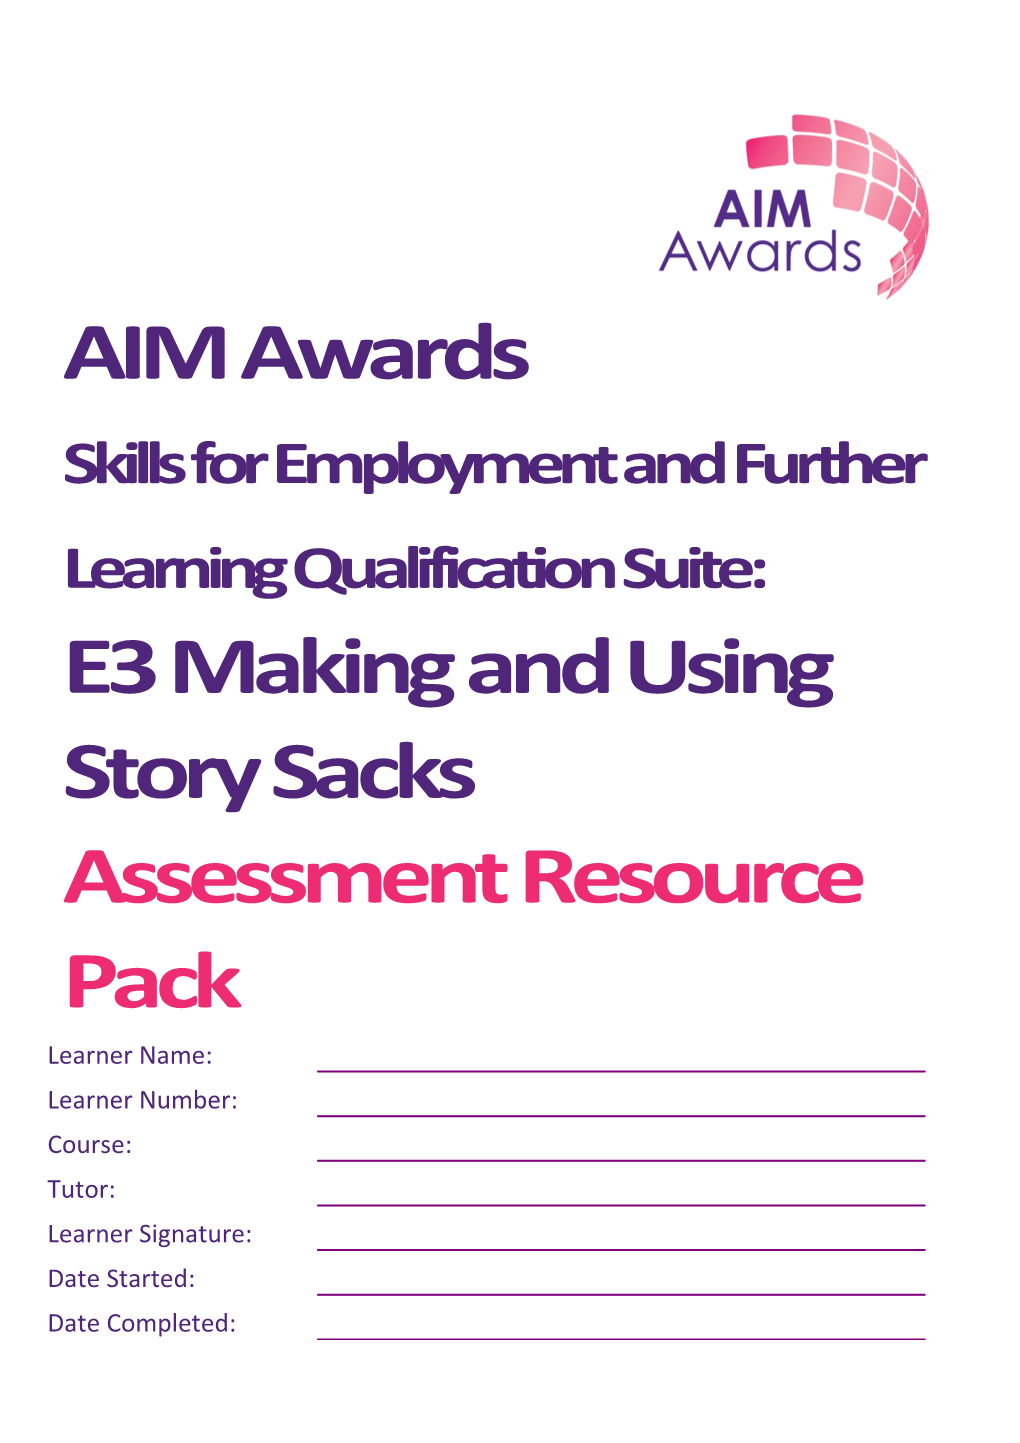 Skills for Employment and Further Learning Qualification Suite